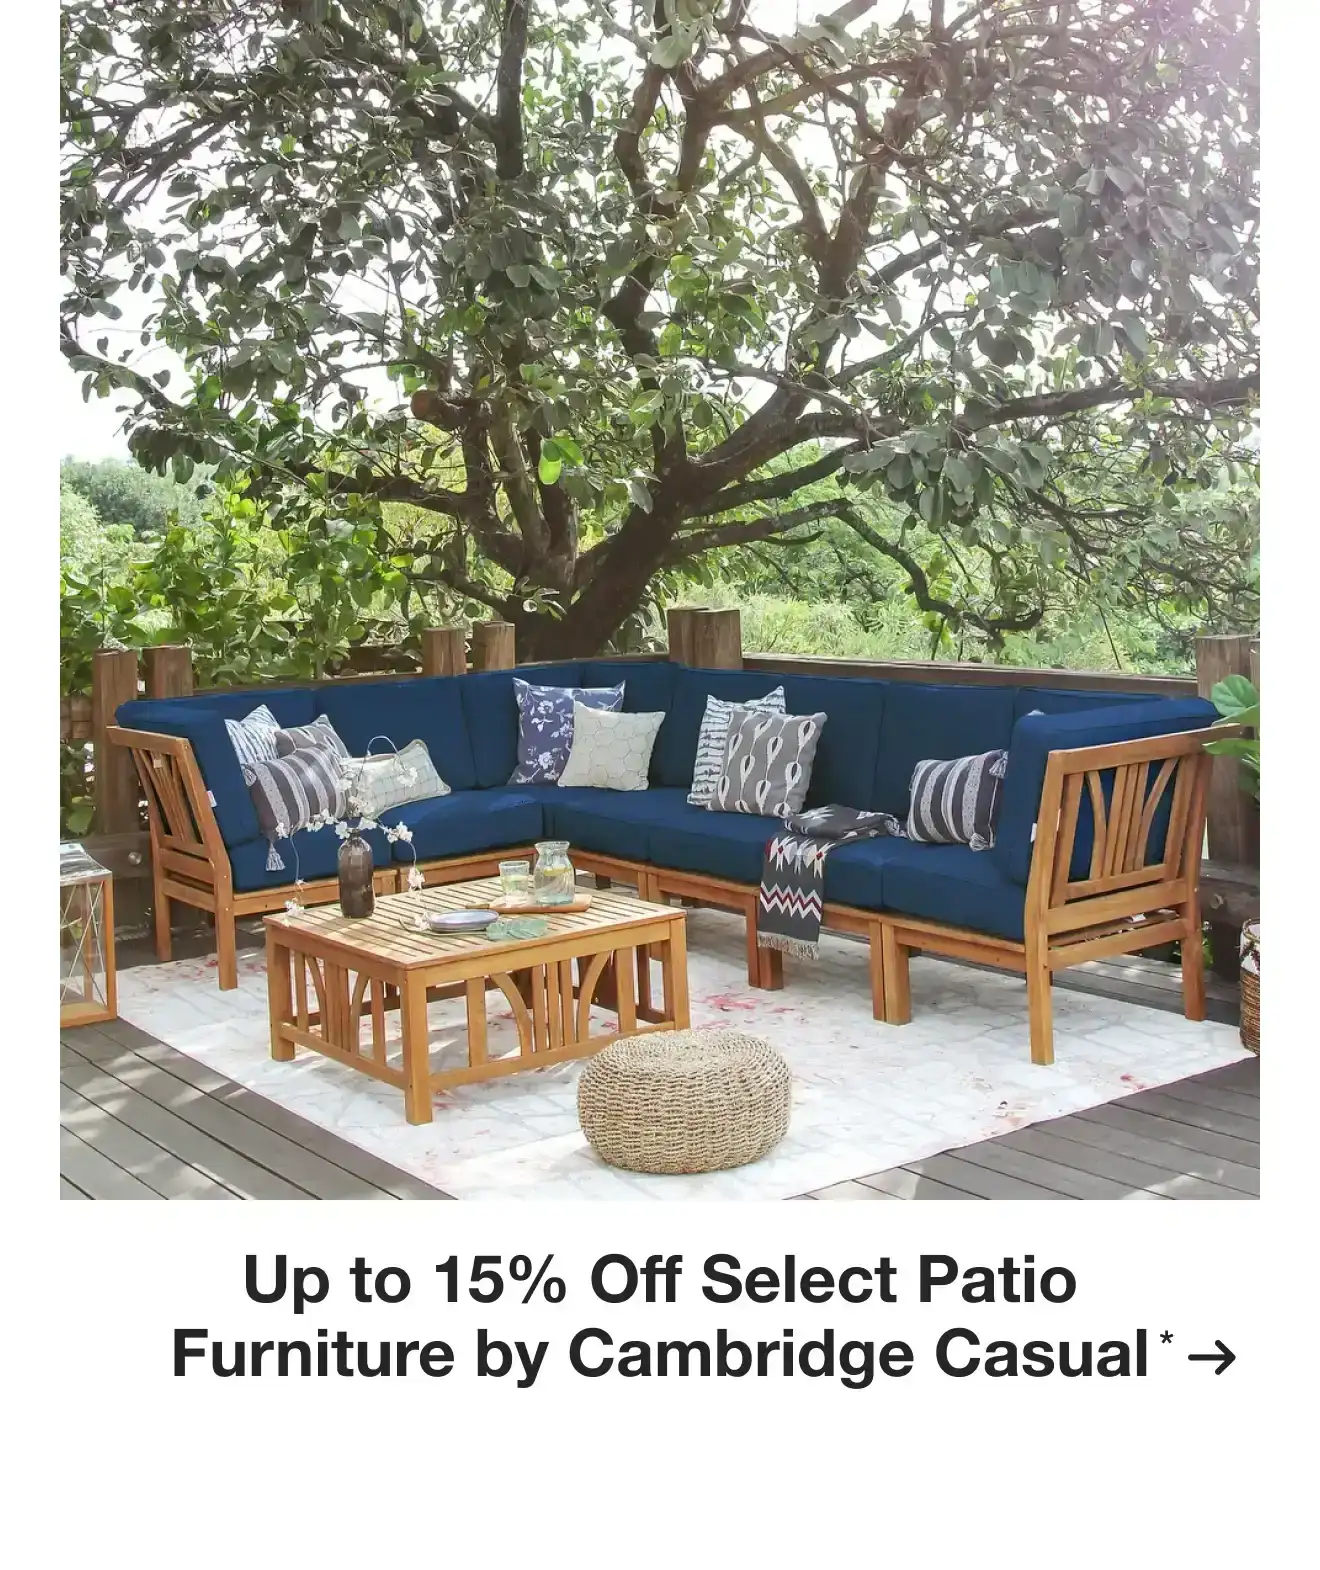 Up to 15% Off Select Patio Furniture by Cambridge Casual*